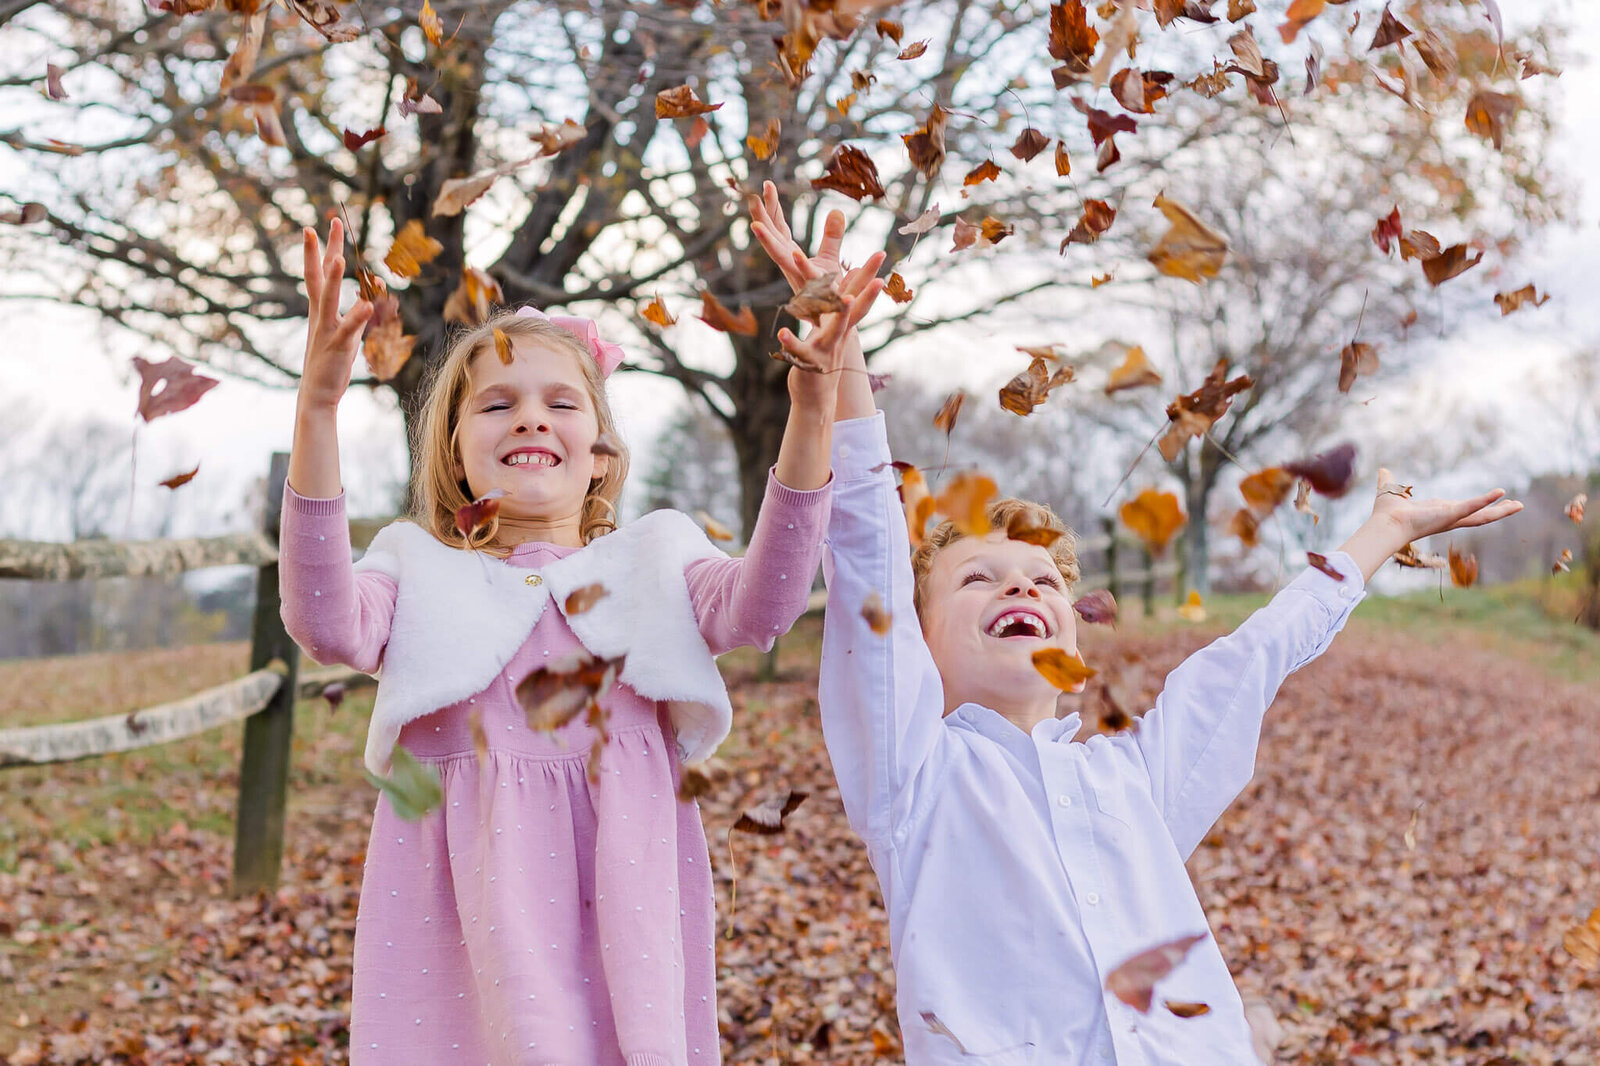 A brother and sister tossing leaves in the air.